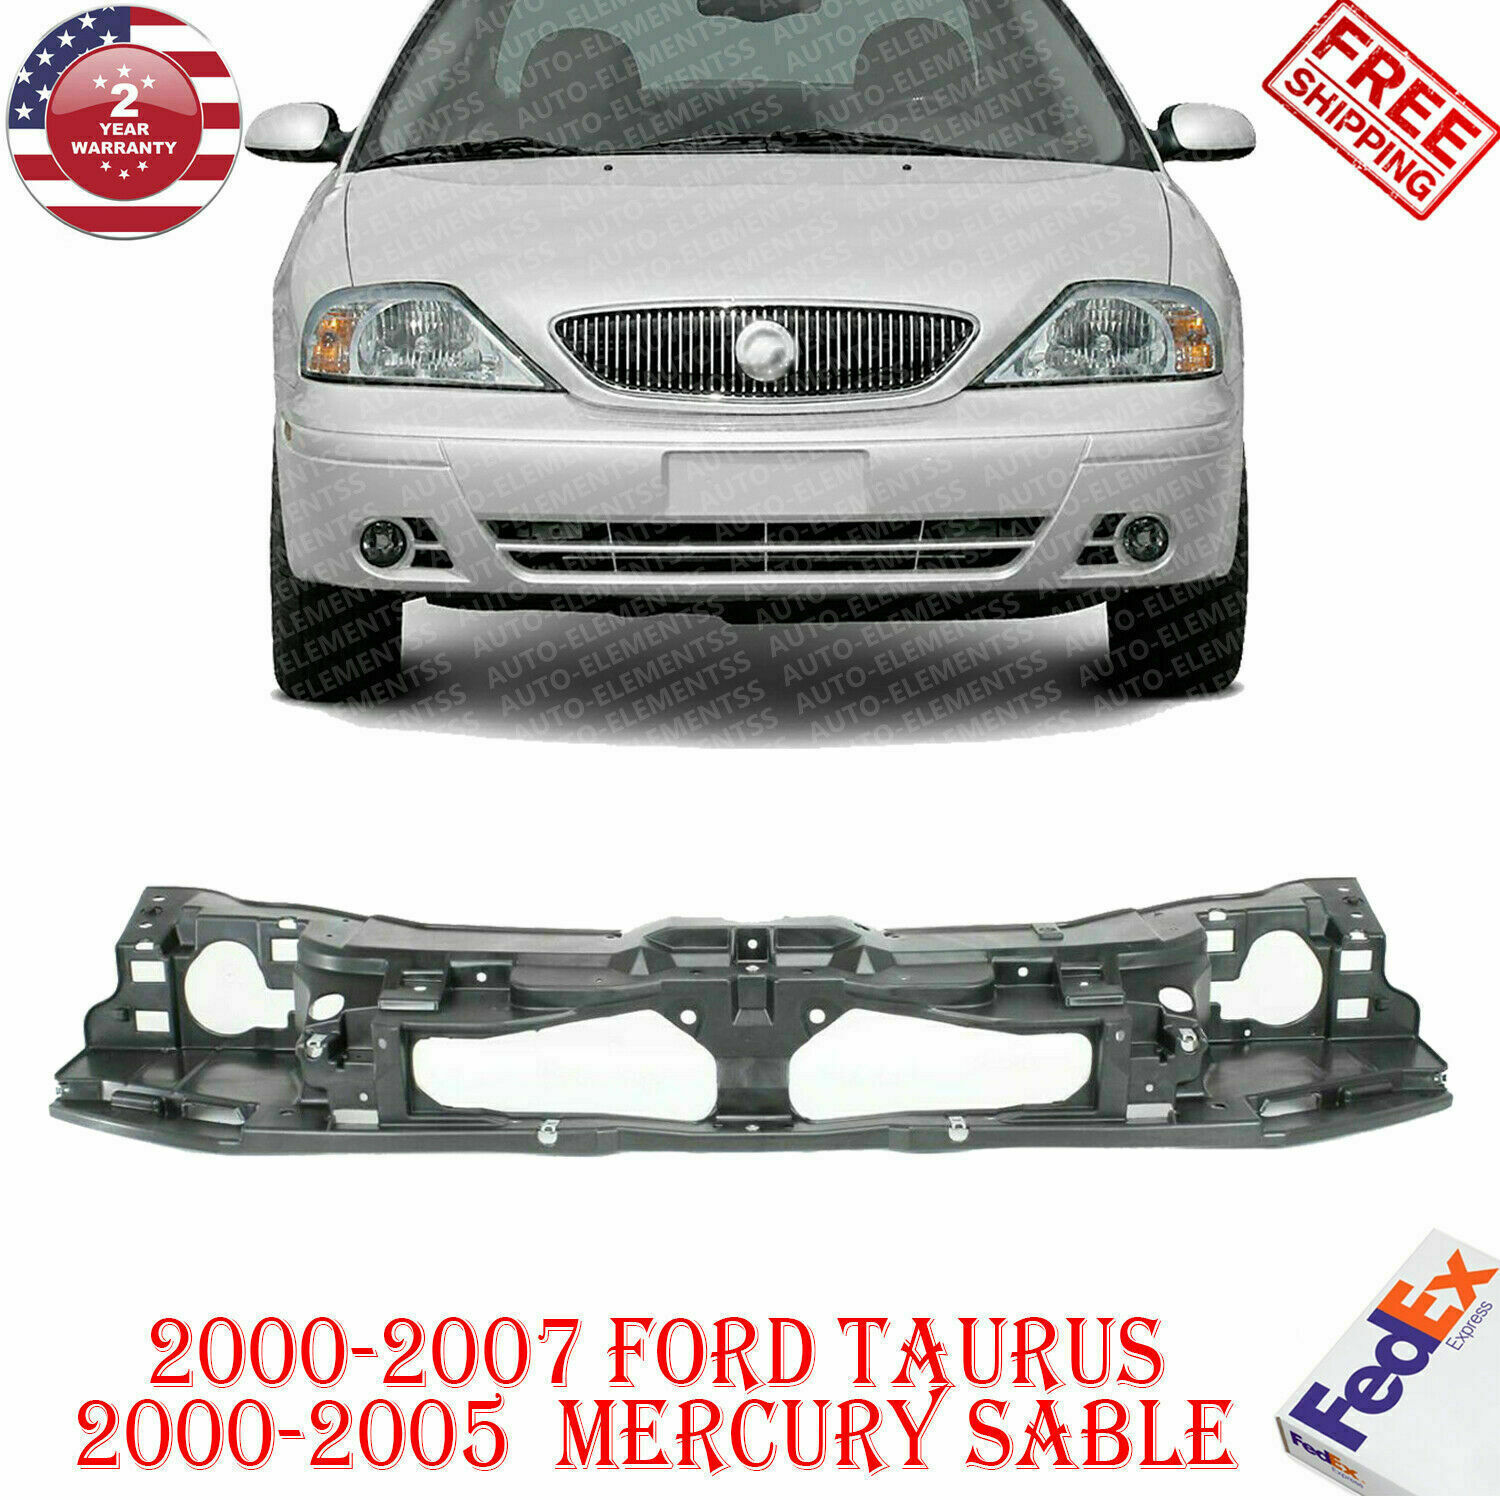 New Grille Mounting Header Panel For 2000-2007 Ford Taurus / 00-05 Mercury Sable